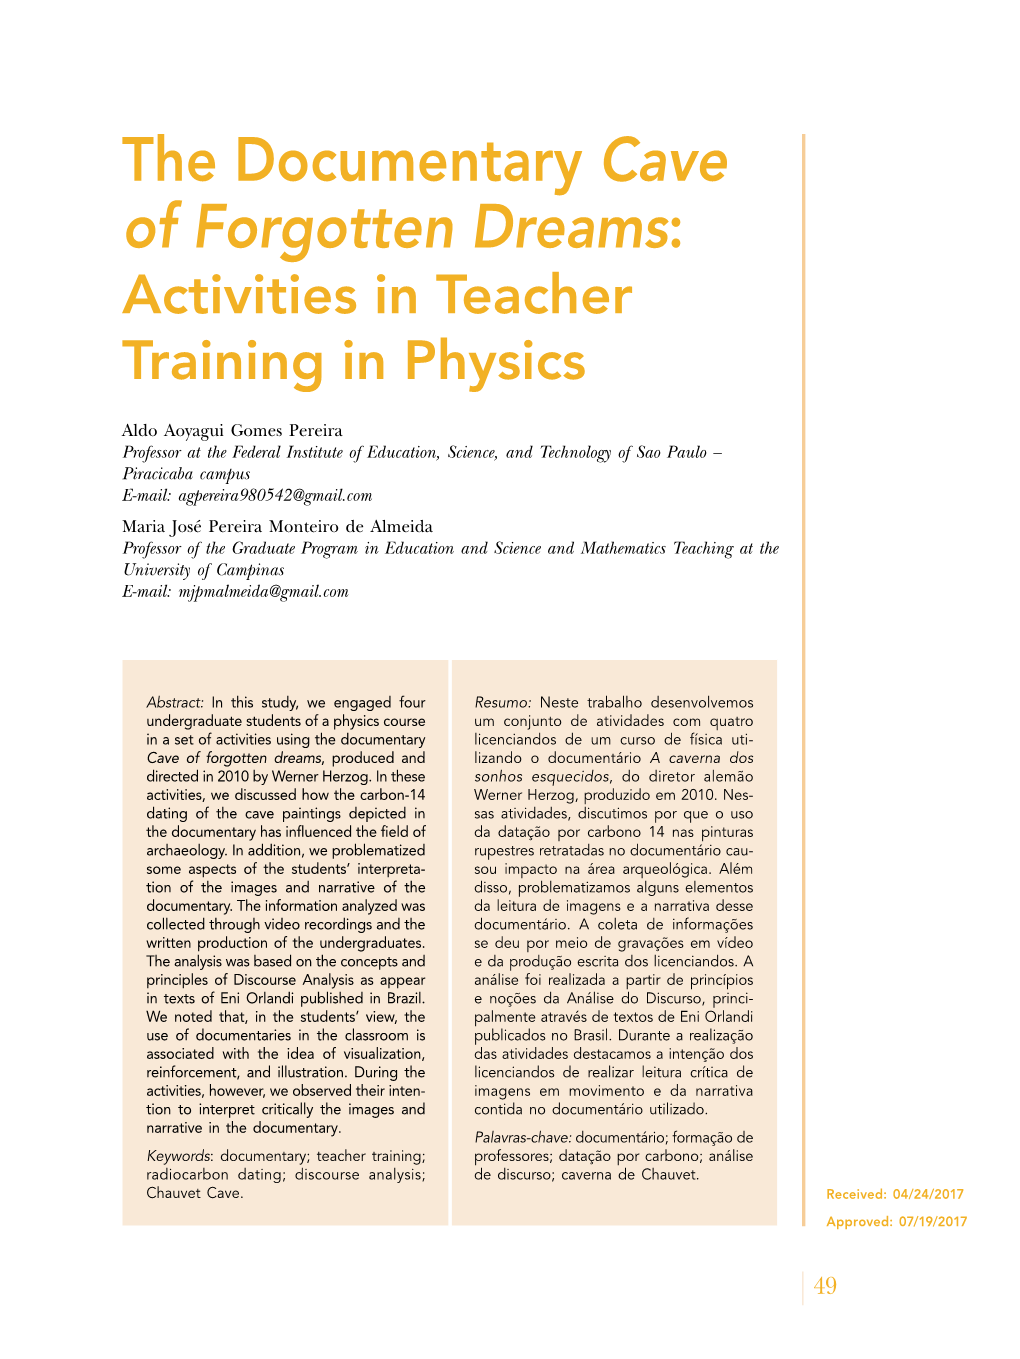 The Documentary Cave of Forgotten Dreams: Activities in Teacher Training in Physics